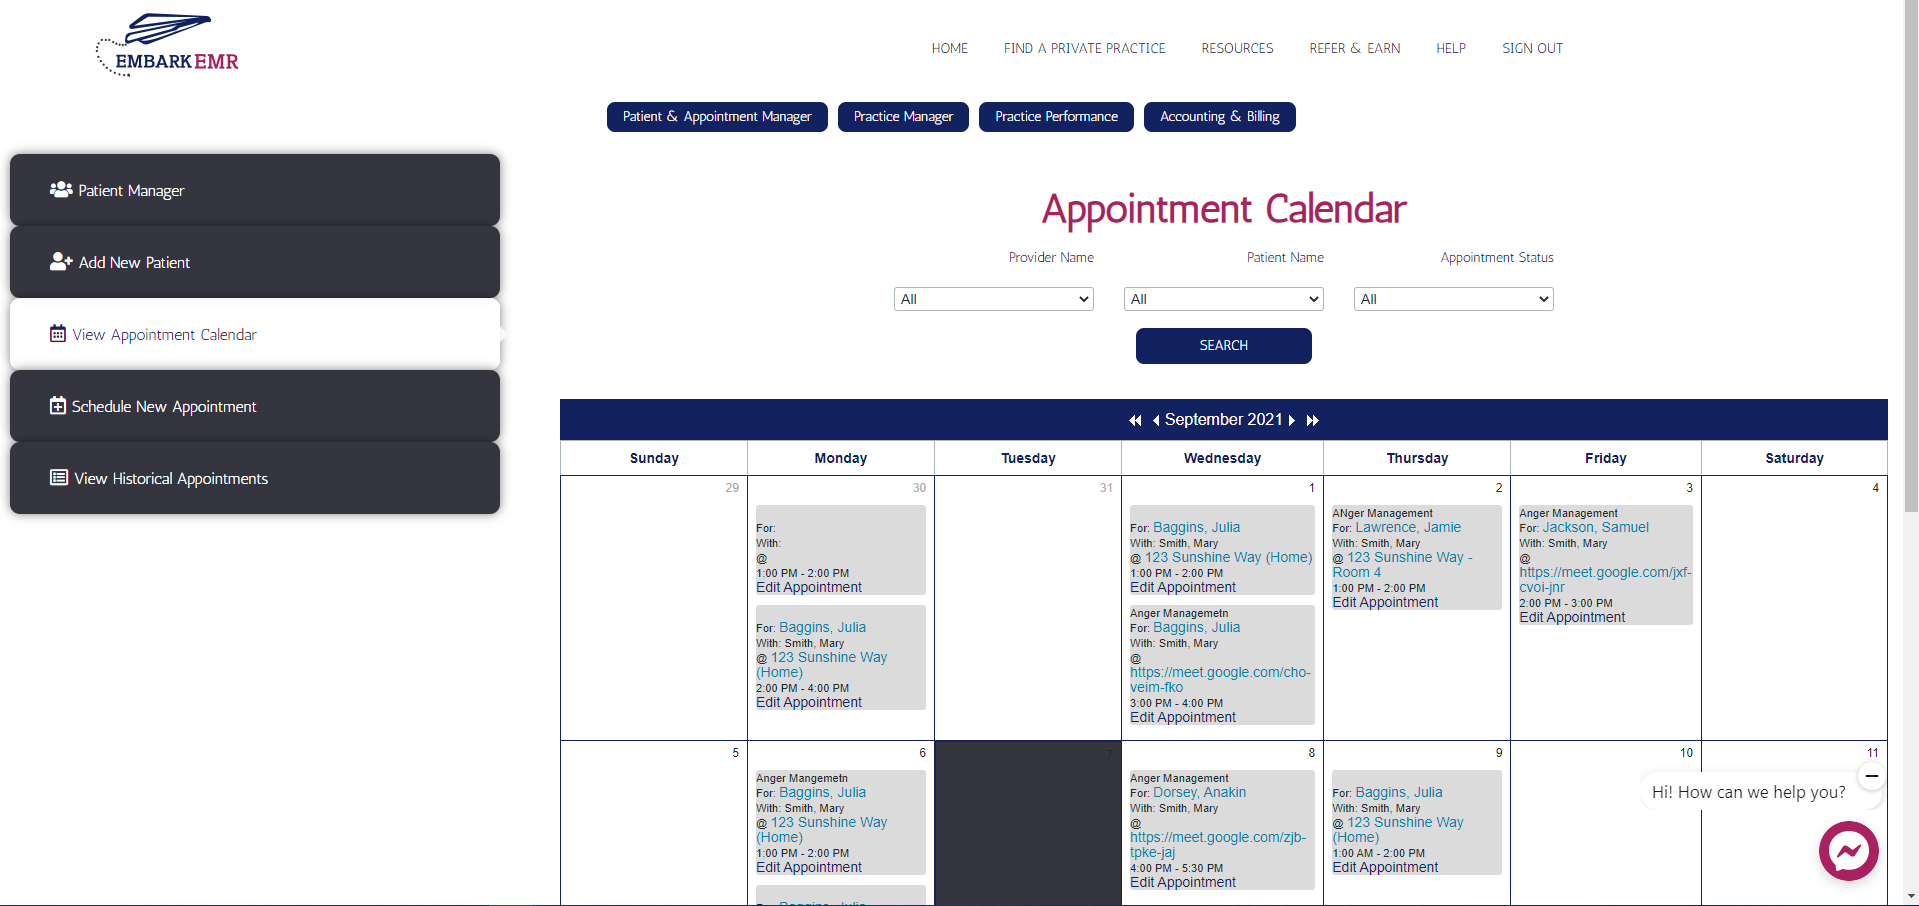 Manage and schedule new appointments directly from the app!  Automated appointment reminders can be sent out via text and email for any newly scheduled appointment.